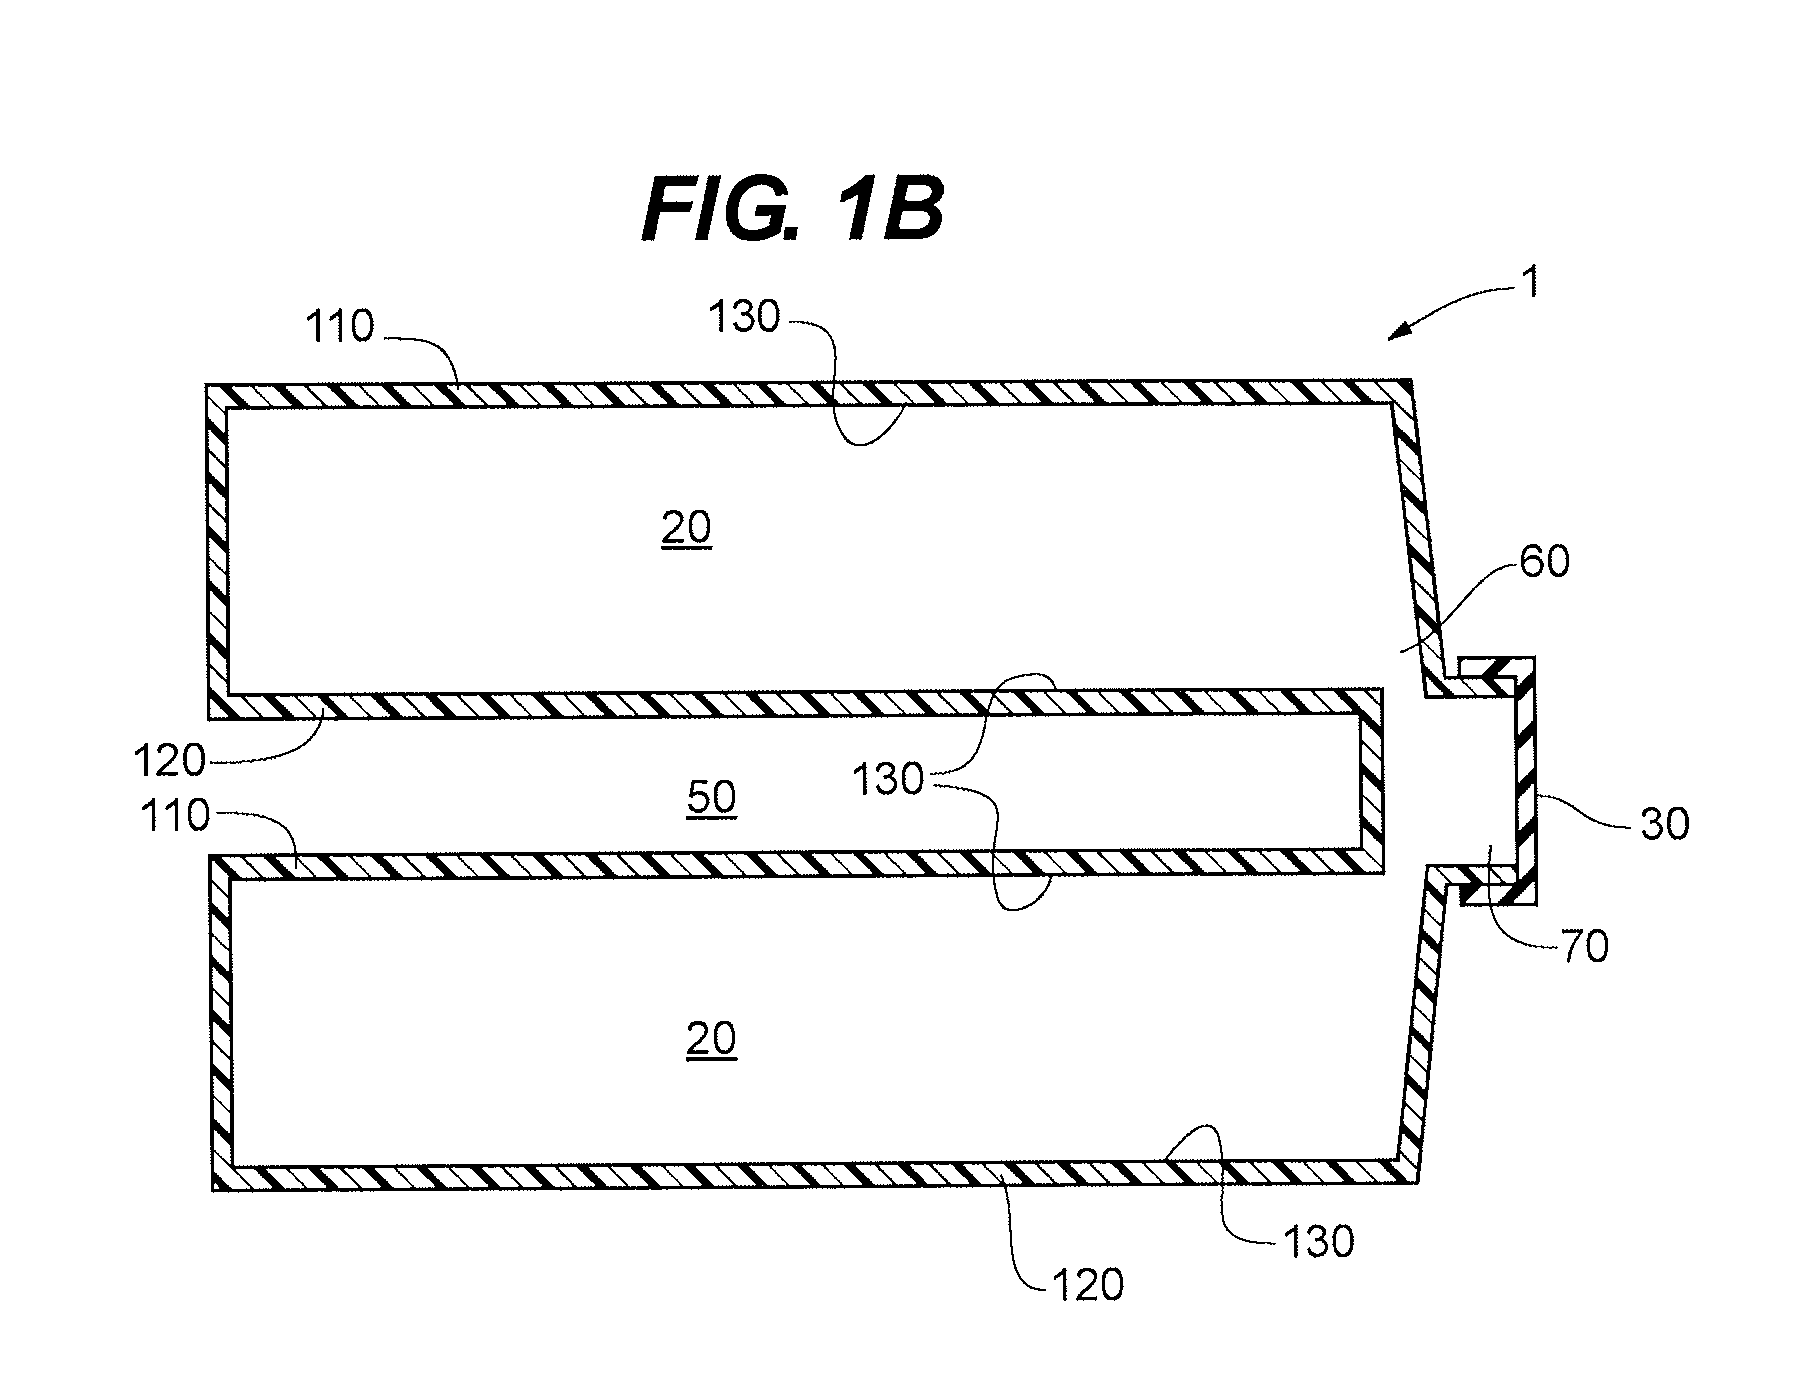 Highly efficient gas permeable devices and methods for culturing cells